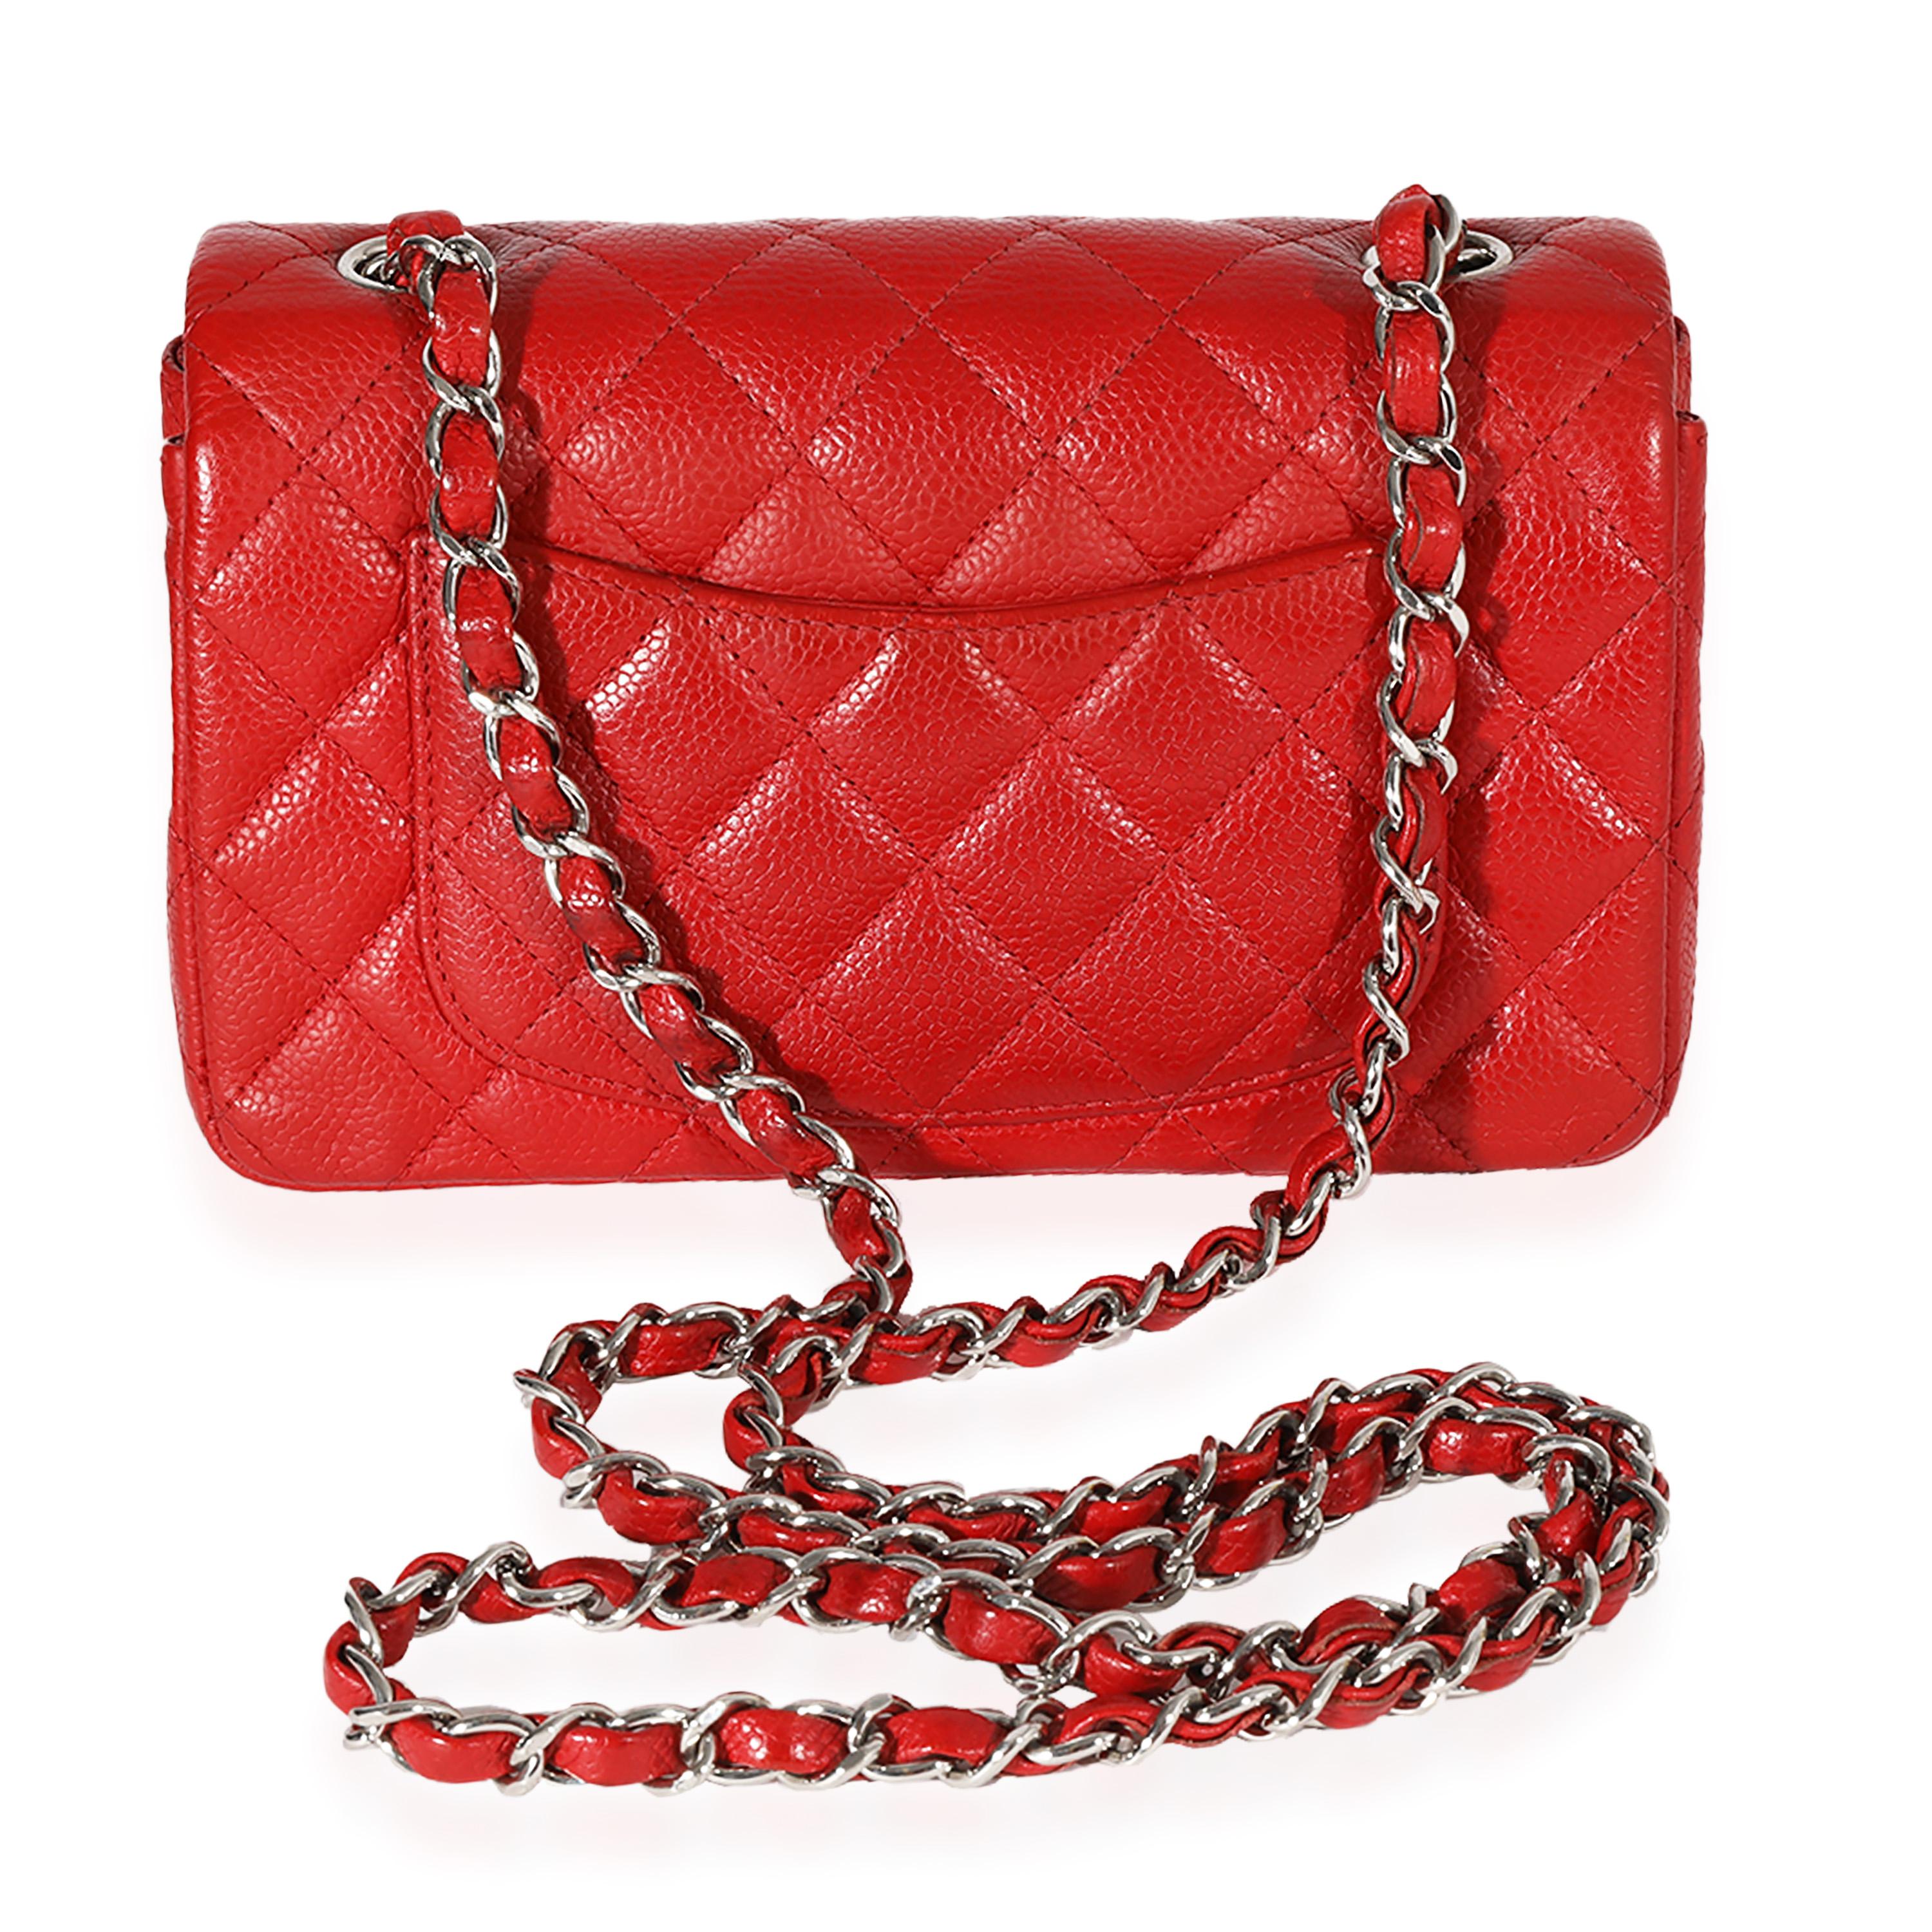 Listing Title: Chanel Red Quilted Caviar Mini Rectangular Classic Flap
SKU: 123155
Condition: Pre-owned 
Handbag Condition: Very Good
Condition Comments: Very Good Condition. Light discoloration and creasing to leather. Light loose threads to